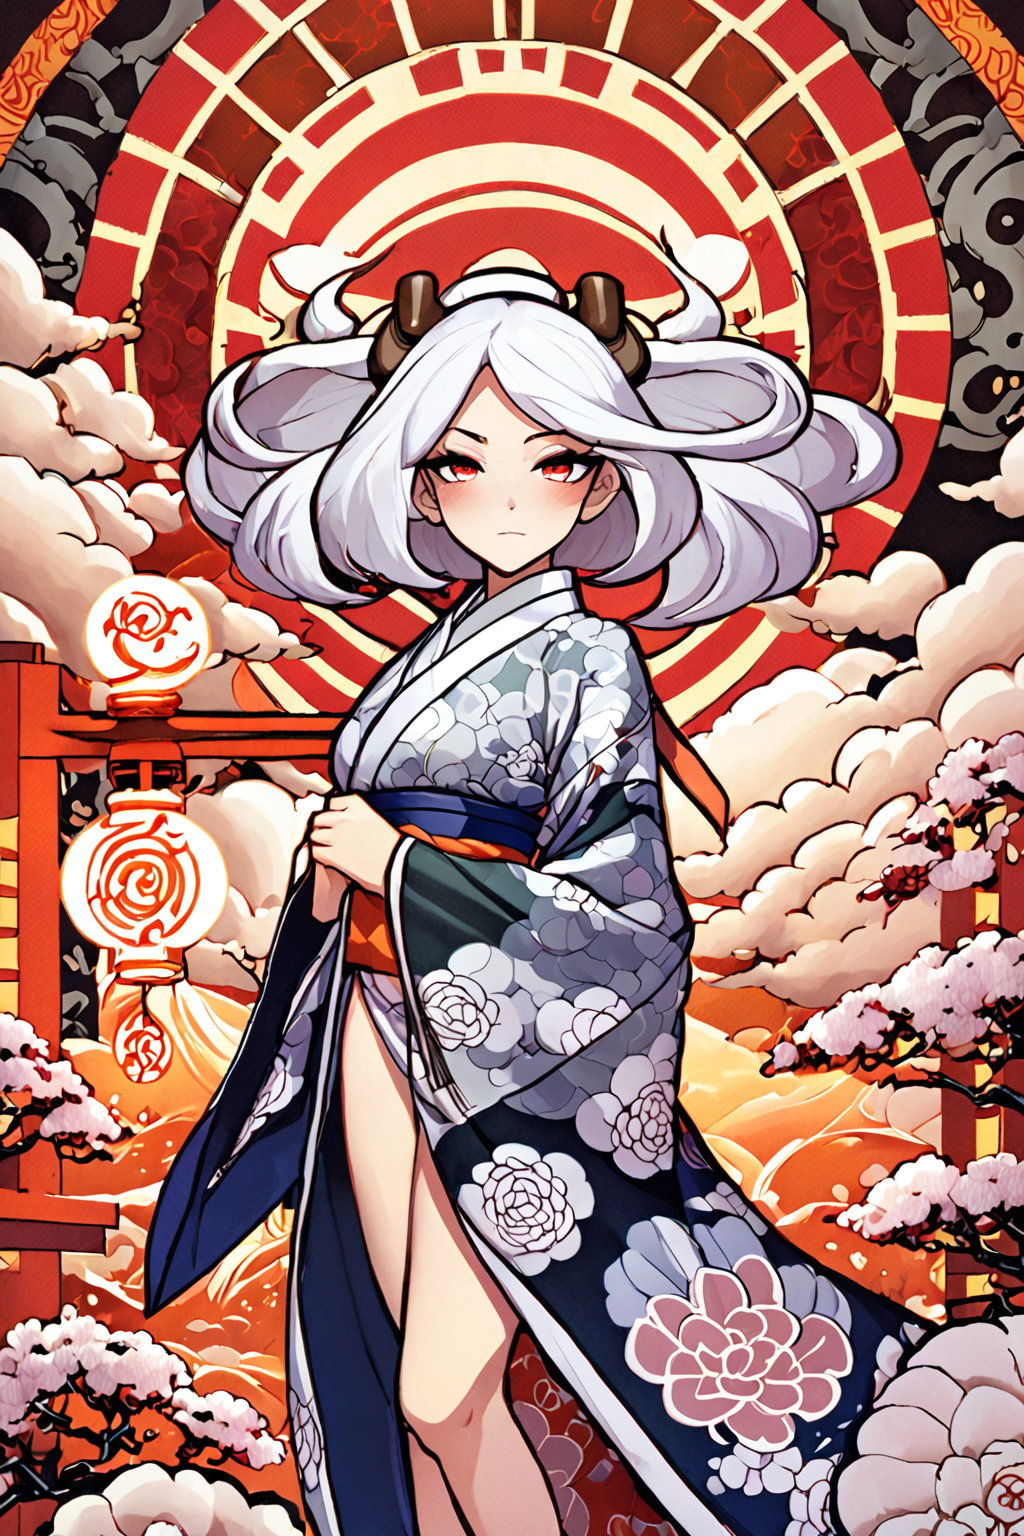 A mysterious Oni warrior, 'Kokoro', stands proudly amidst a vibrant, swirling background featuring intricate Japanese patterns. starlits skies at beautiful shrine, Her striking features are illuminated by realistic, high-fidelity lighting, showcasing her porcelain complexion and piercing gaze. A cascade of long, flowing white hair frames her face, while a stylish kimono wraps around her lithe figure. High-heels adorn her feet, adding a touch of sophistication to her intimidating presence. (skullgirls art style : 1.3), [bold outlines art : 1.2], (sensual manhwa art : 2), (cartoon webcomics style art : 1.3),